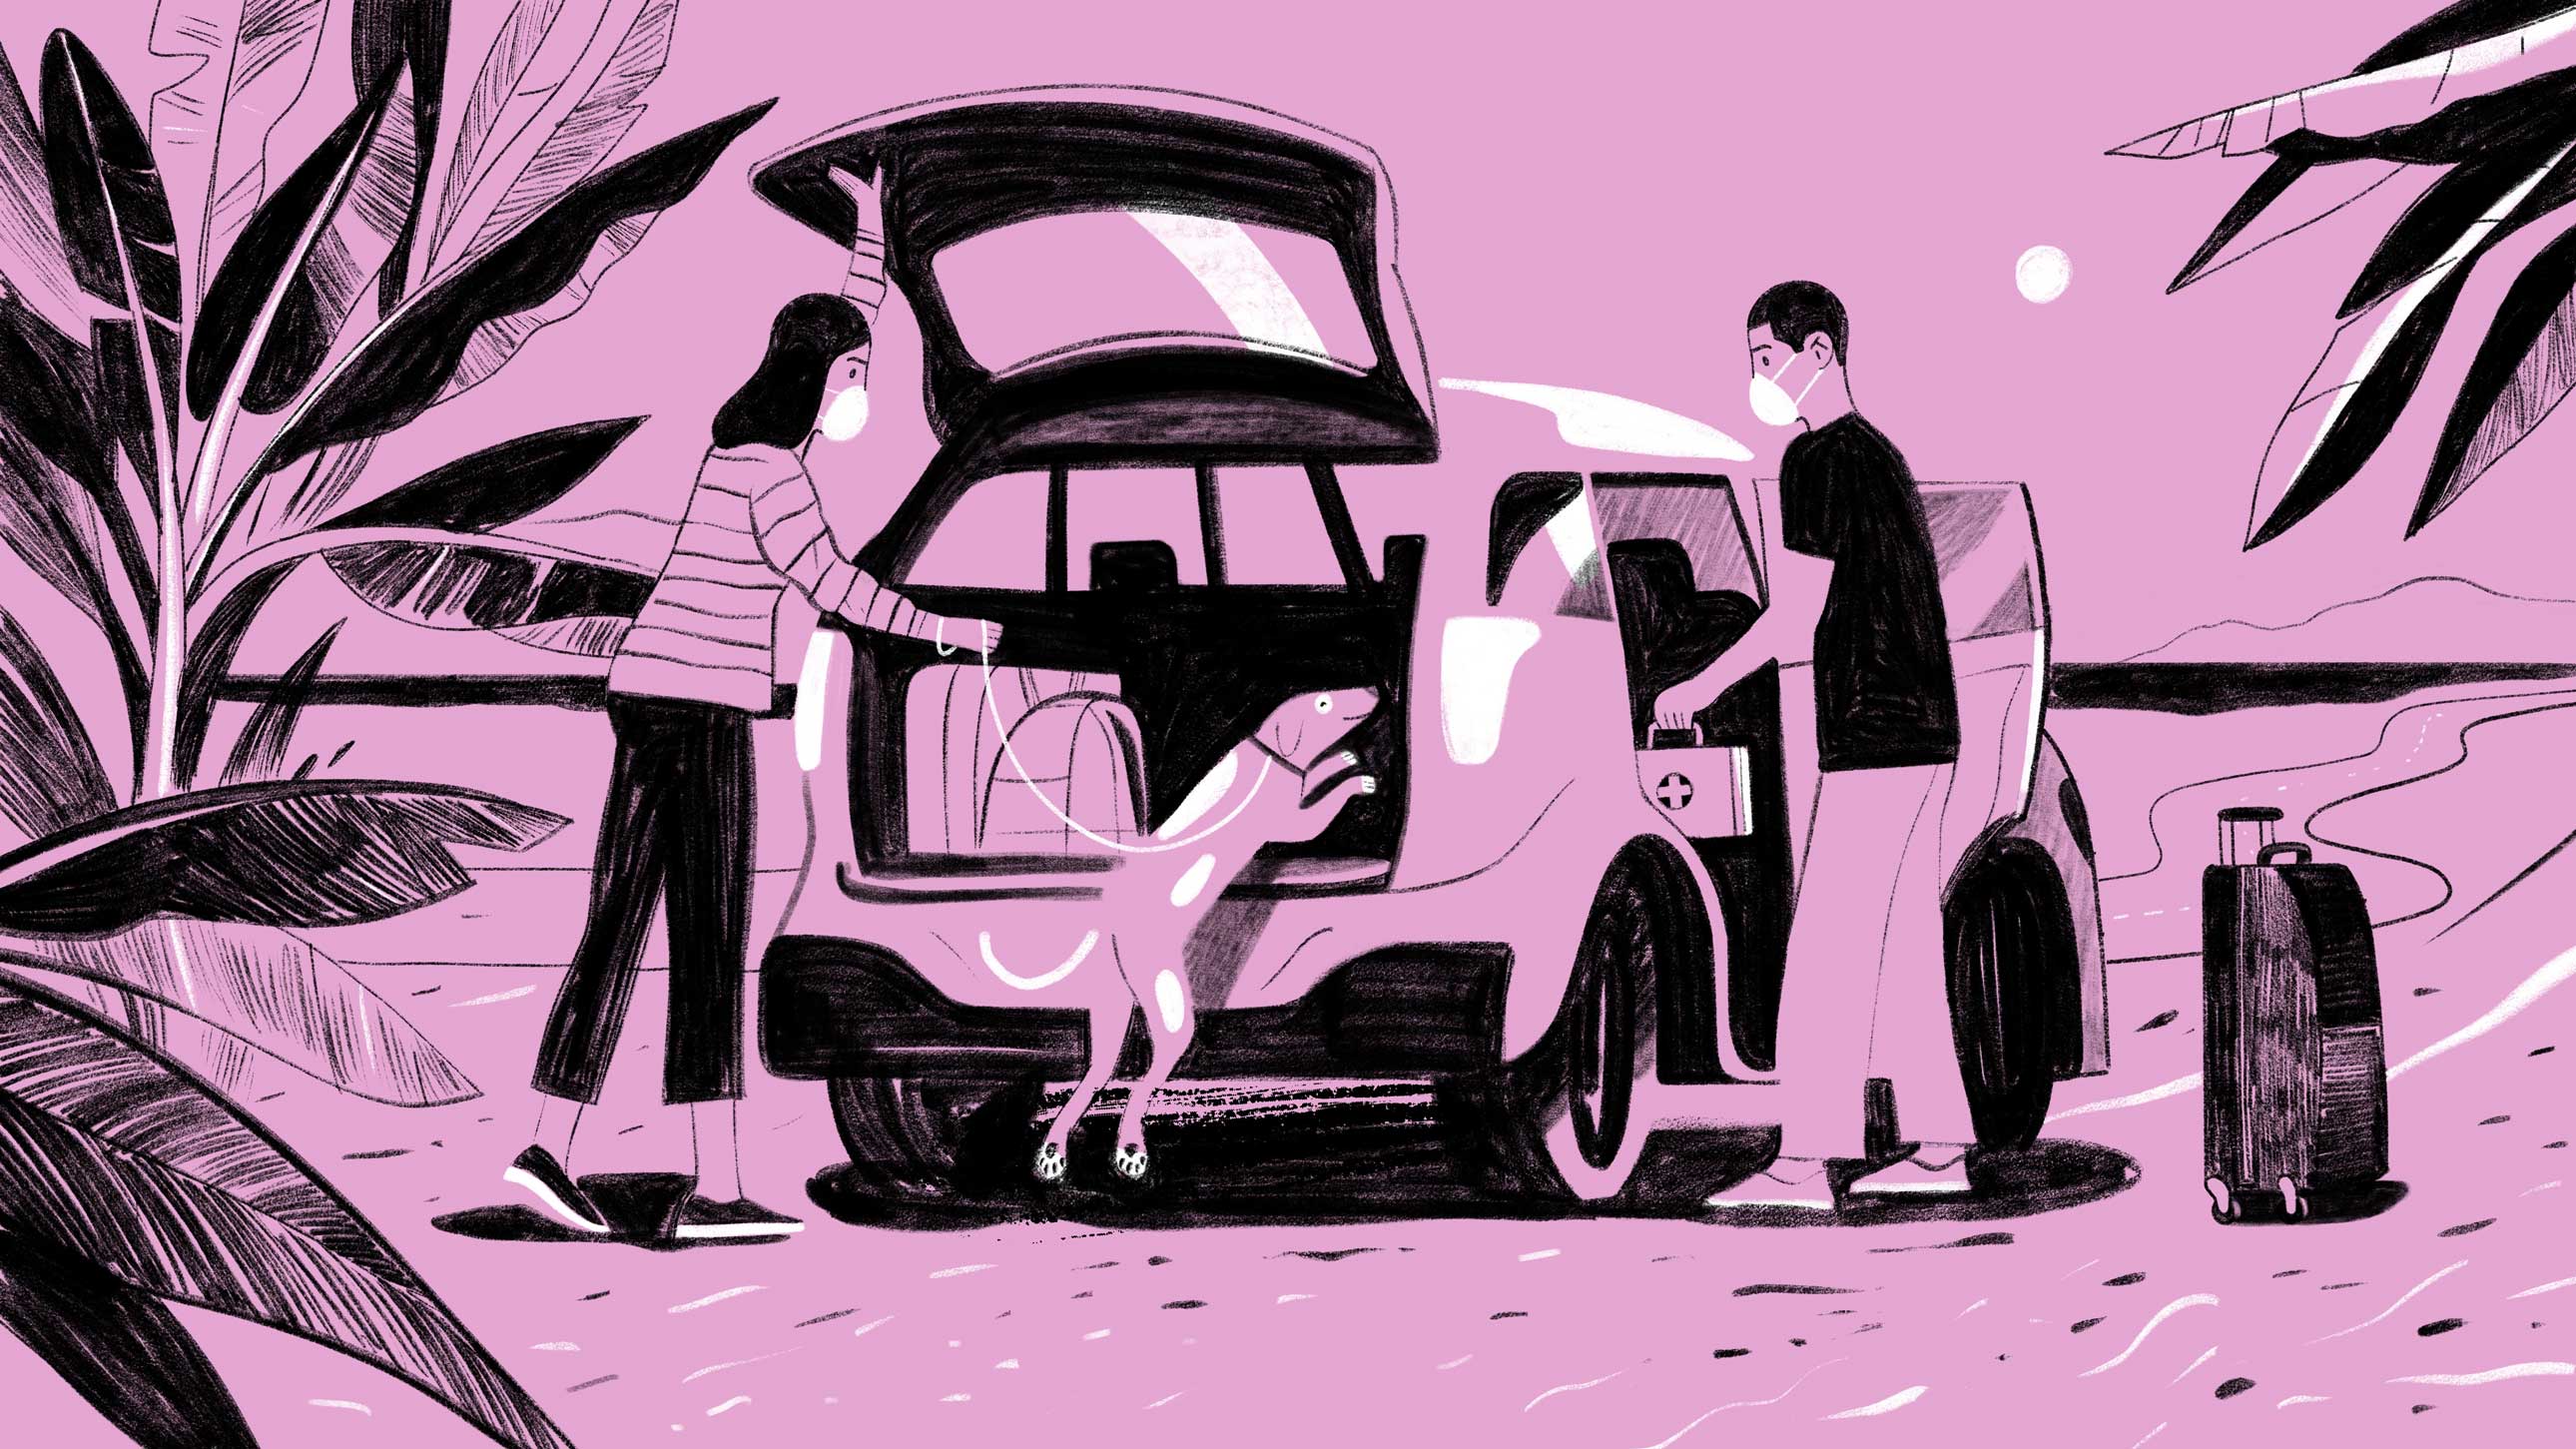 An illustration of a man and a woman wearing medical masks. They are putting luggage and a first aid kit into their car, as their dog jumps into the back of the open tailgate.